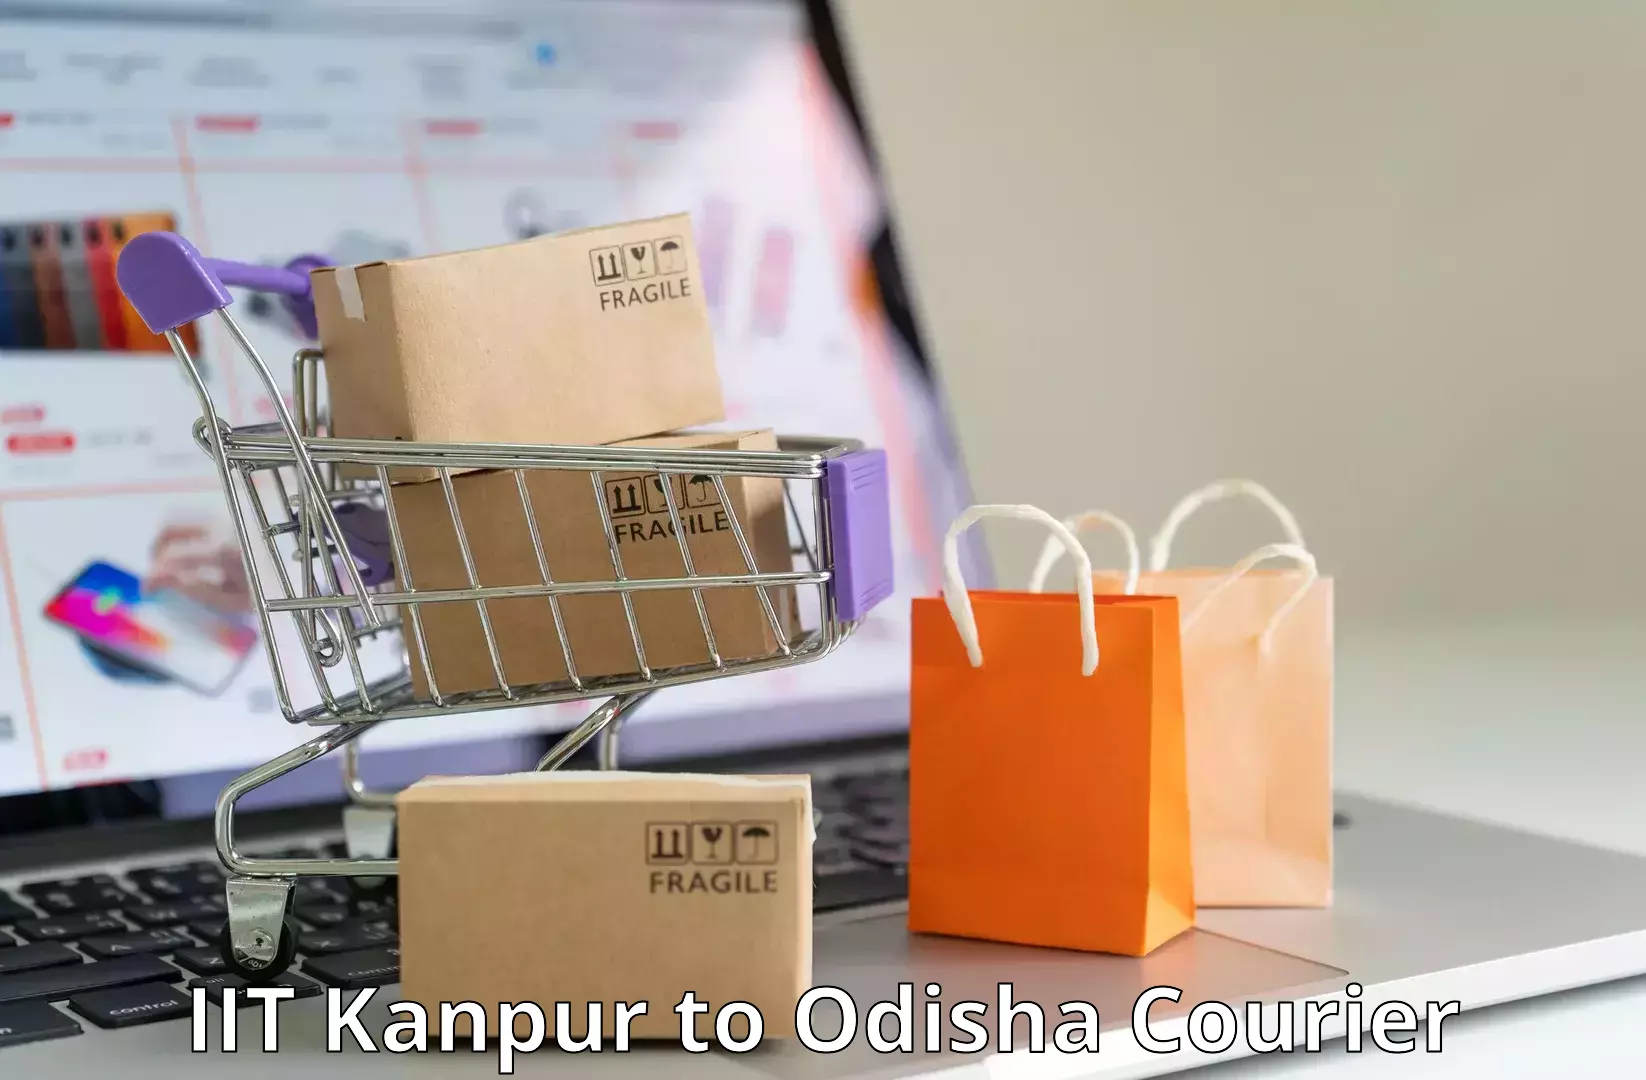 Courier service innovation IIT Kanpur to Bangriposi